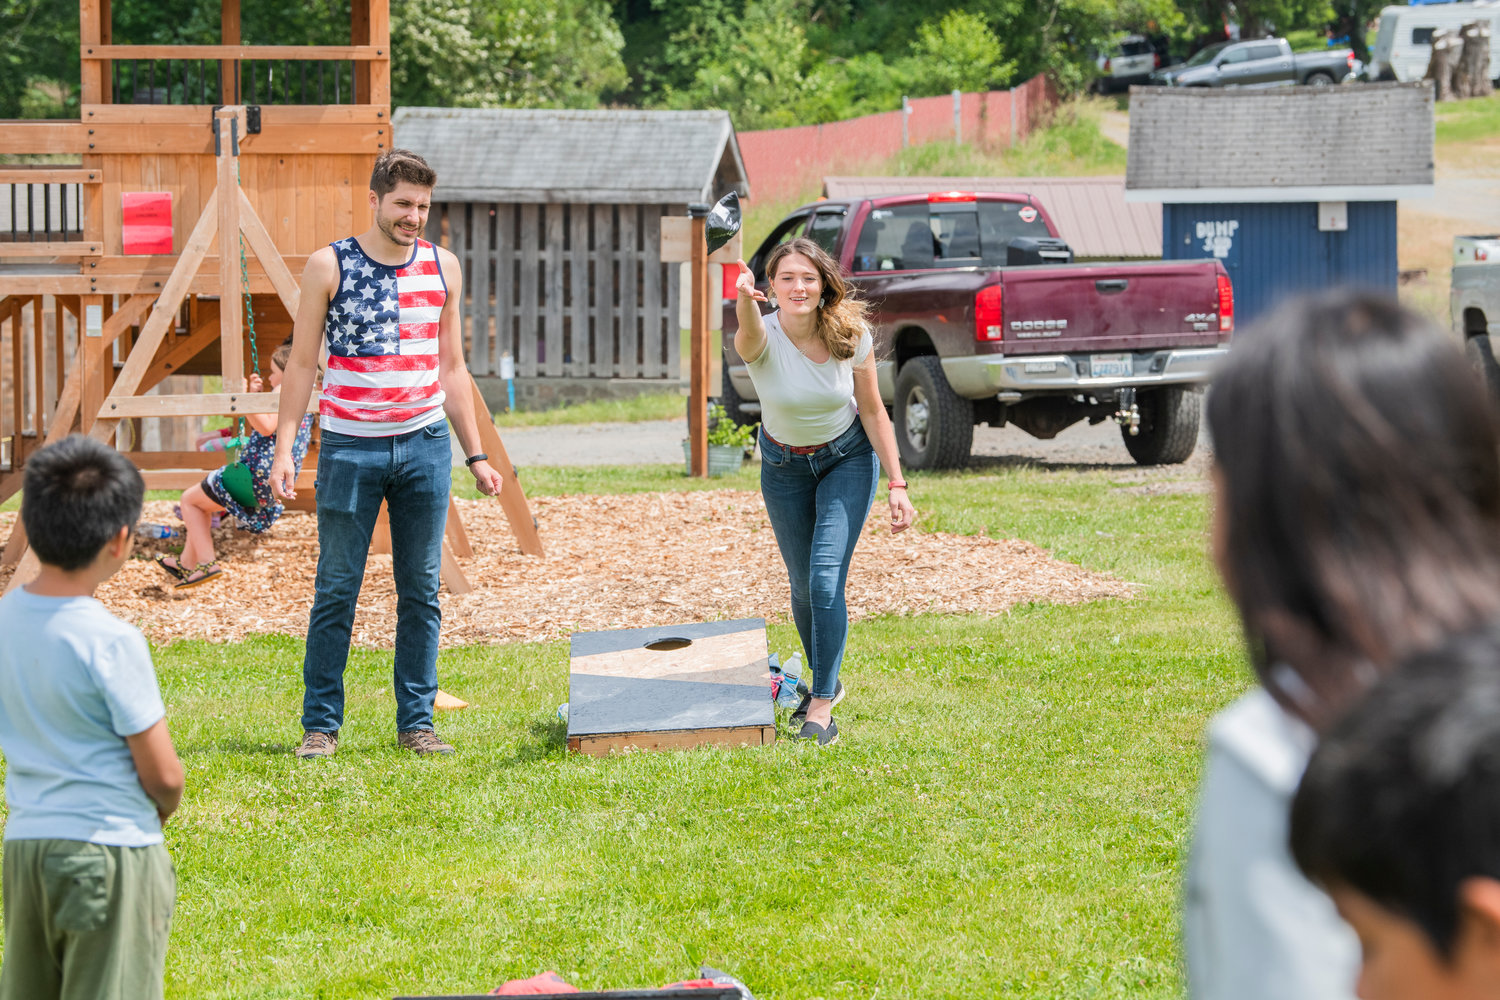 Shane and Lauren Welter smile while playing cornhole at the Lions Den Campground before performing music together as “Shore Lane,” Saturday in Mineral.